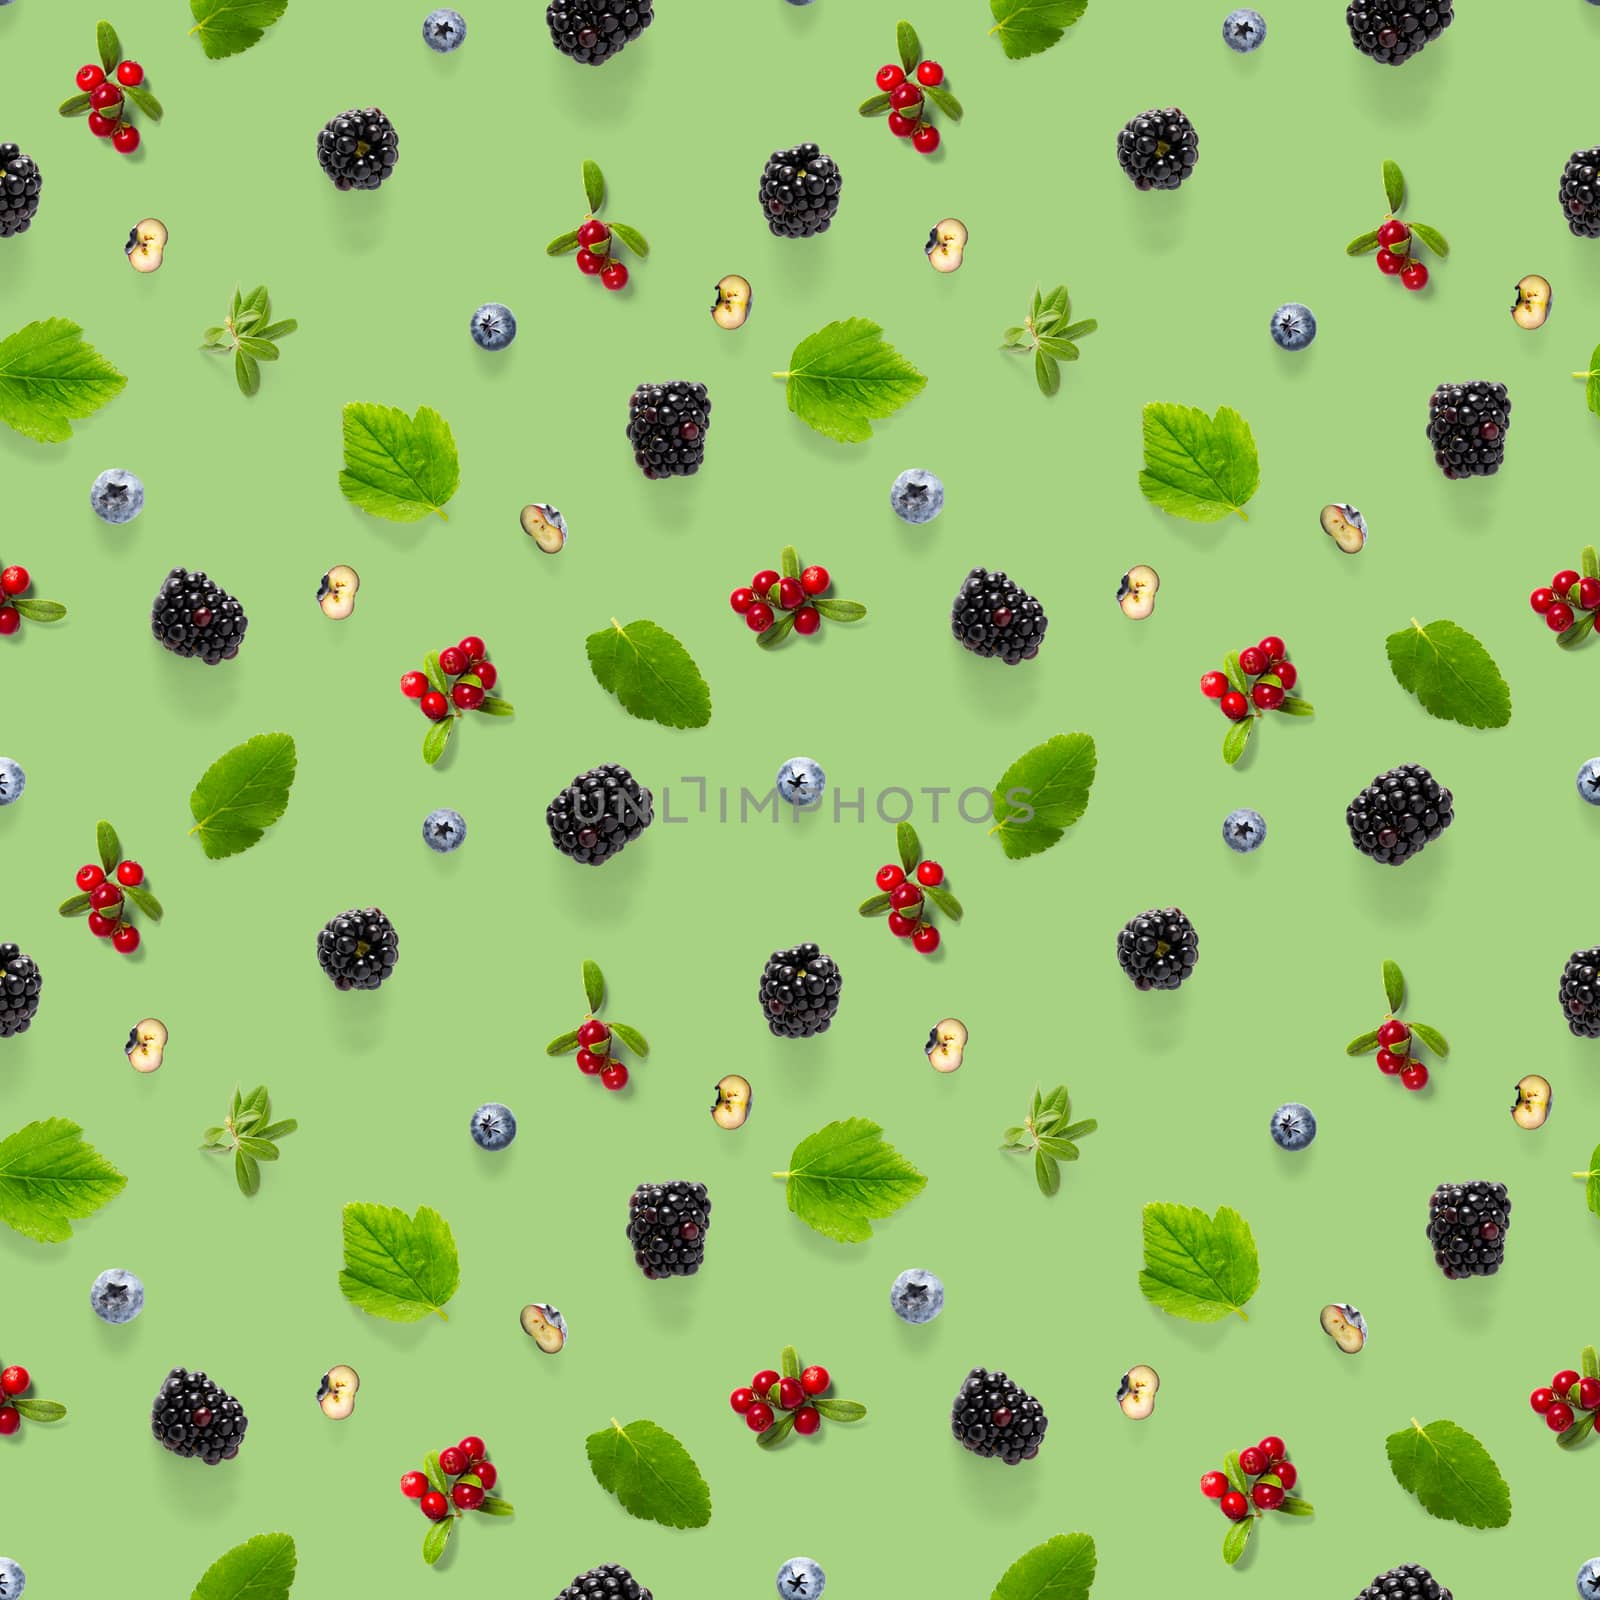 Creative seamless pattern of wild berries, blackberry, blueberry, lingonberry and bramble. modern seamless pattern on green backgriund made from autumn forest wild berries. Forest berries mix